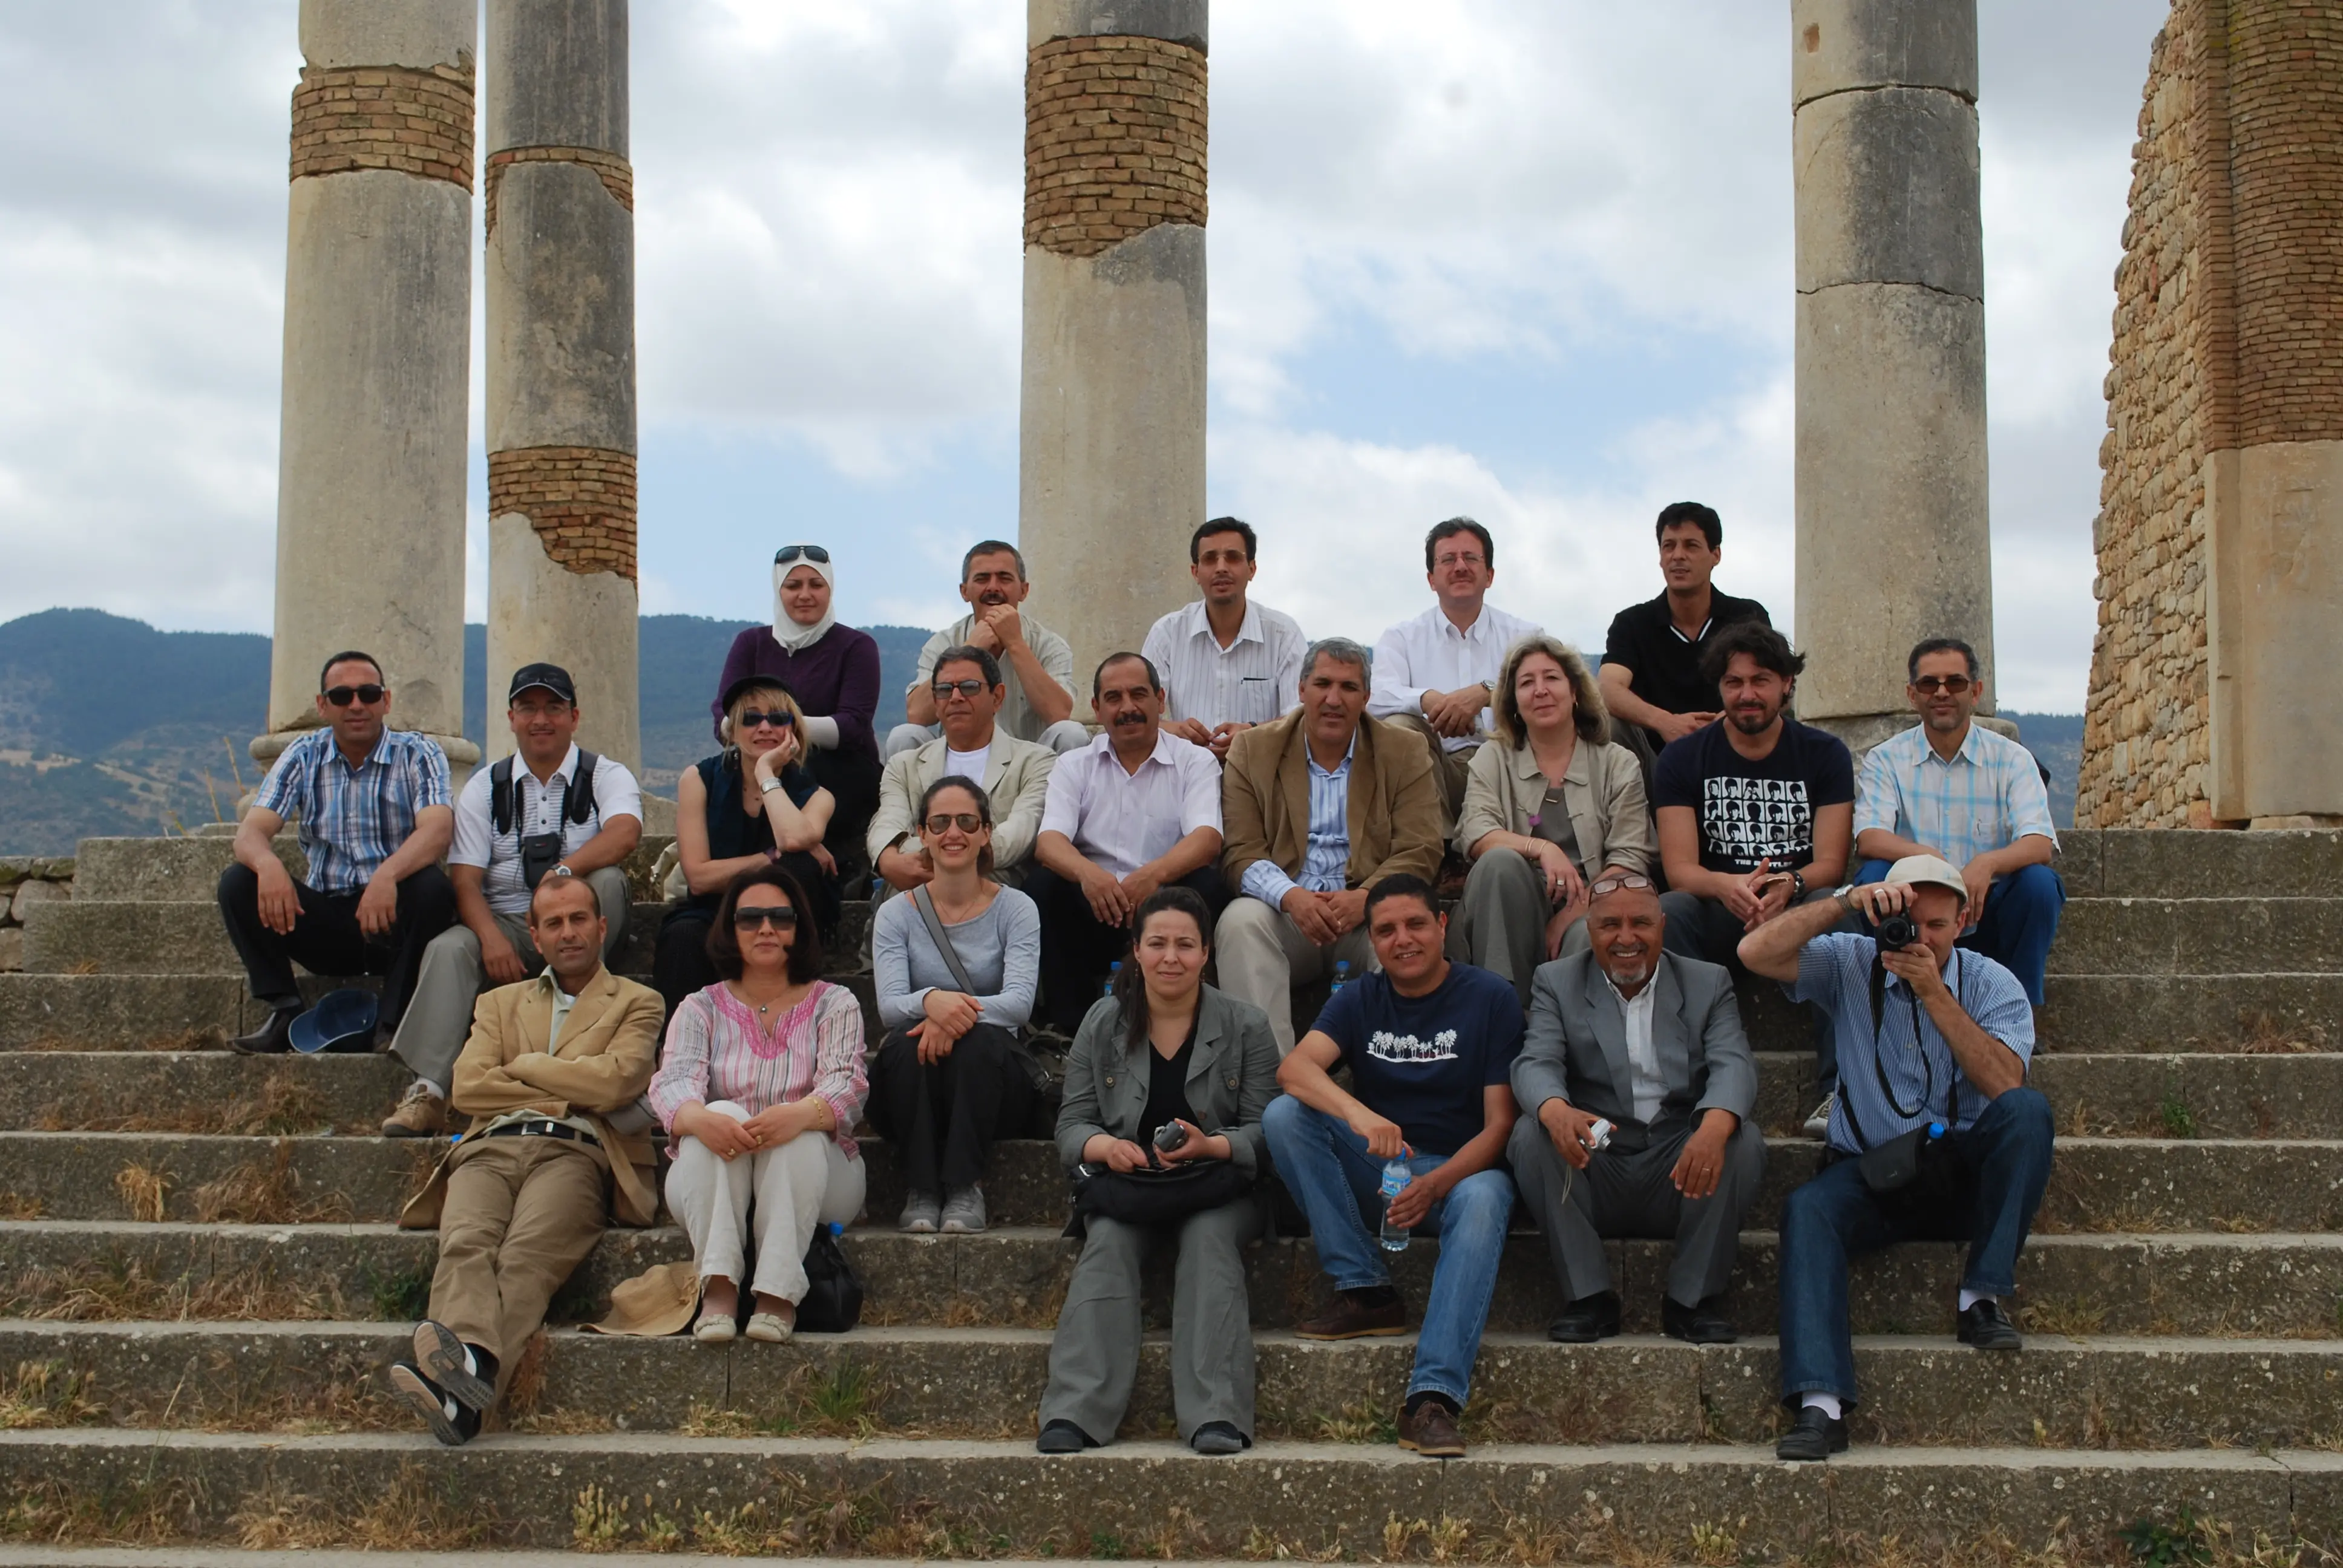 Participants of the World Heritage Sub-Regional Meeting in Meknes, Morocco